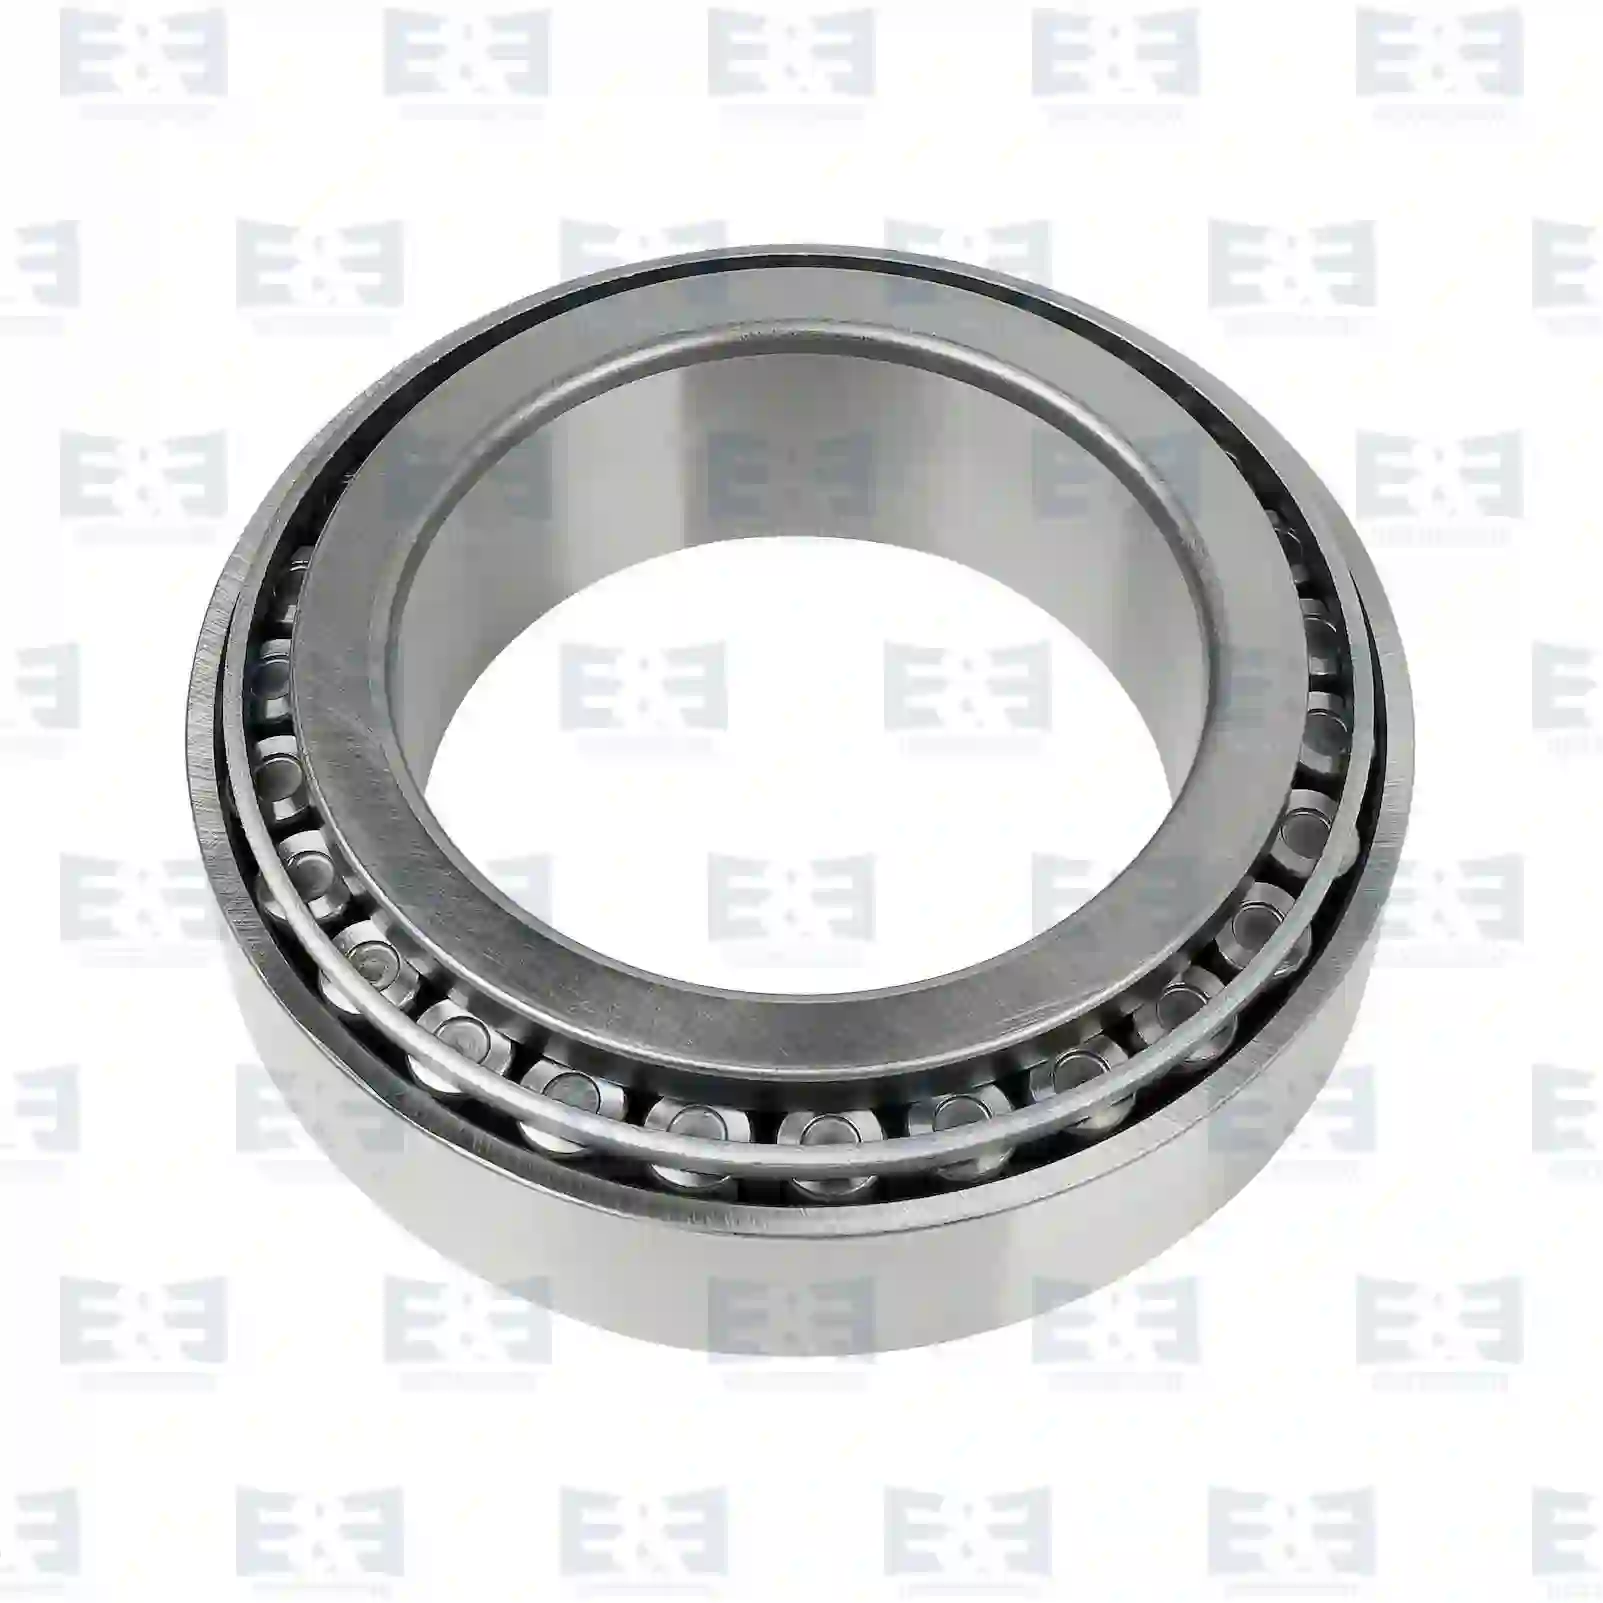 Hub Tapered roller bearing, EE No 2E2284063 ,  oem no:06324990044, 06324990151, 06324990155, 81934200103, 87524601802, 0049810705, 0049810905, 0059812105, 0089813505, 0189817105, 0959443022, 184116, ZG02993-0008 E&E Truck Spare Parts | Truck Spare Parts, Auotomotive Spare Parts